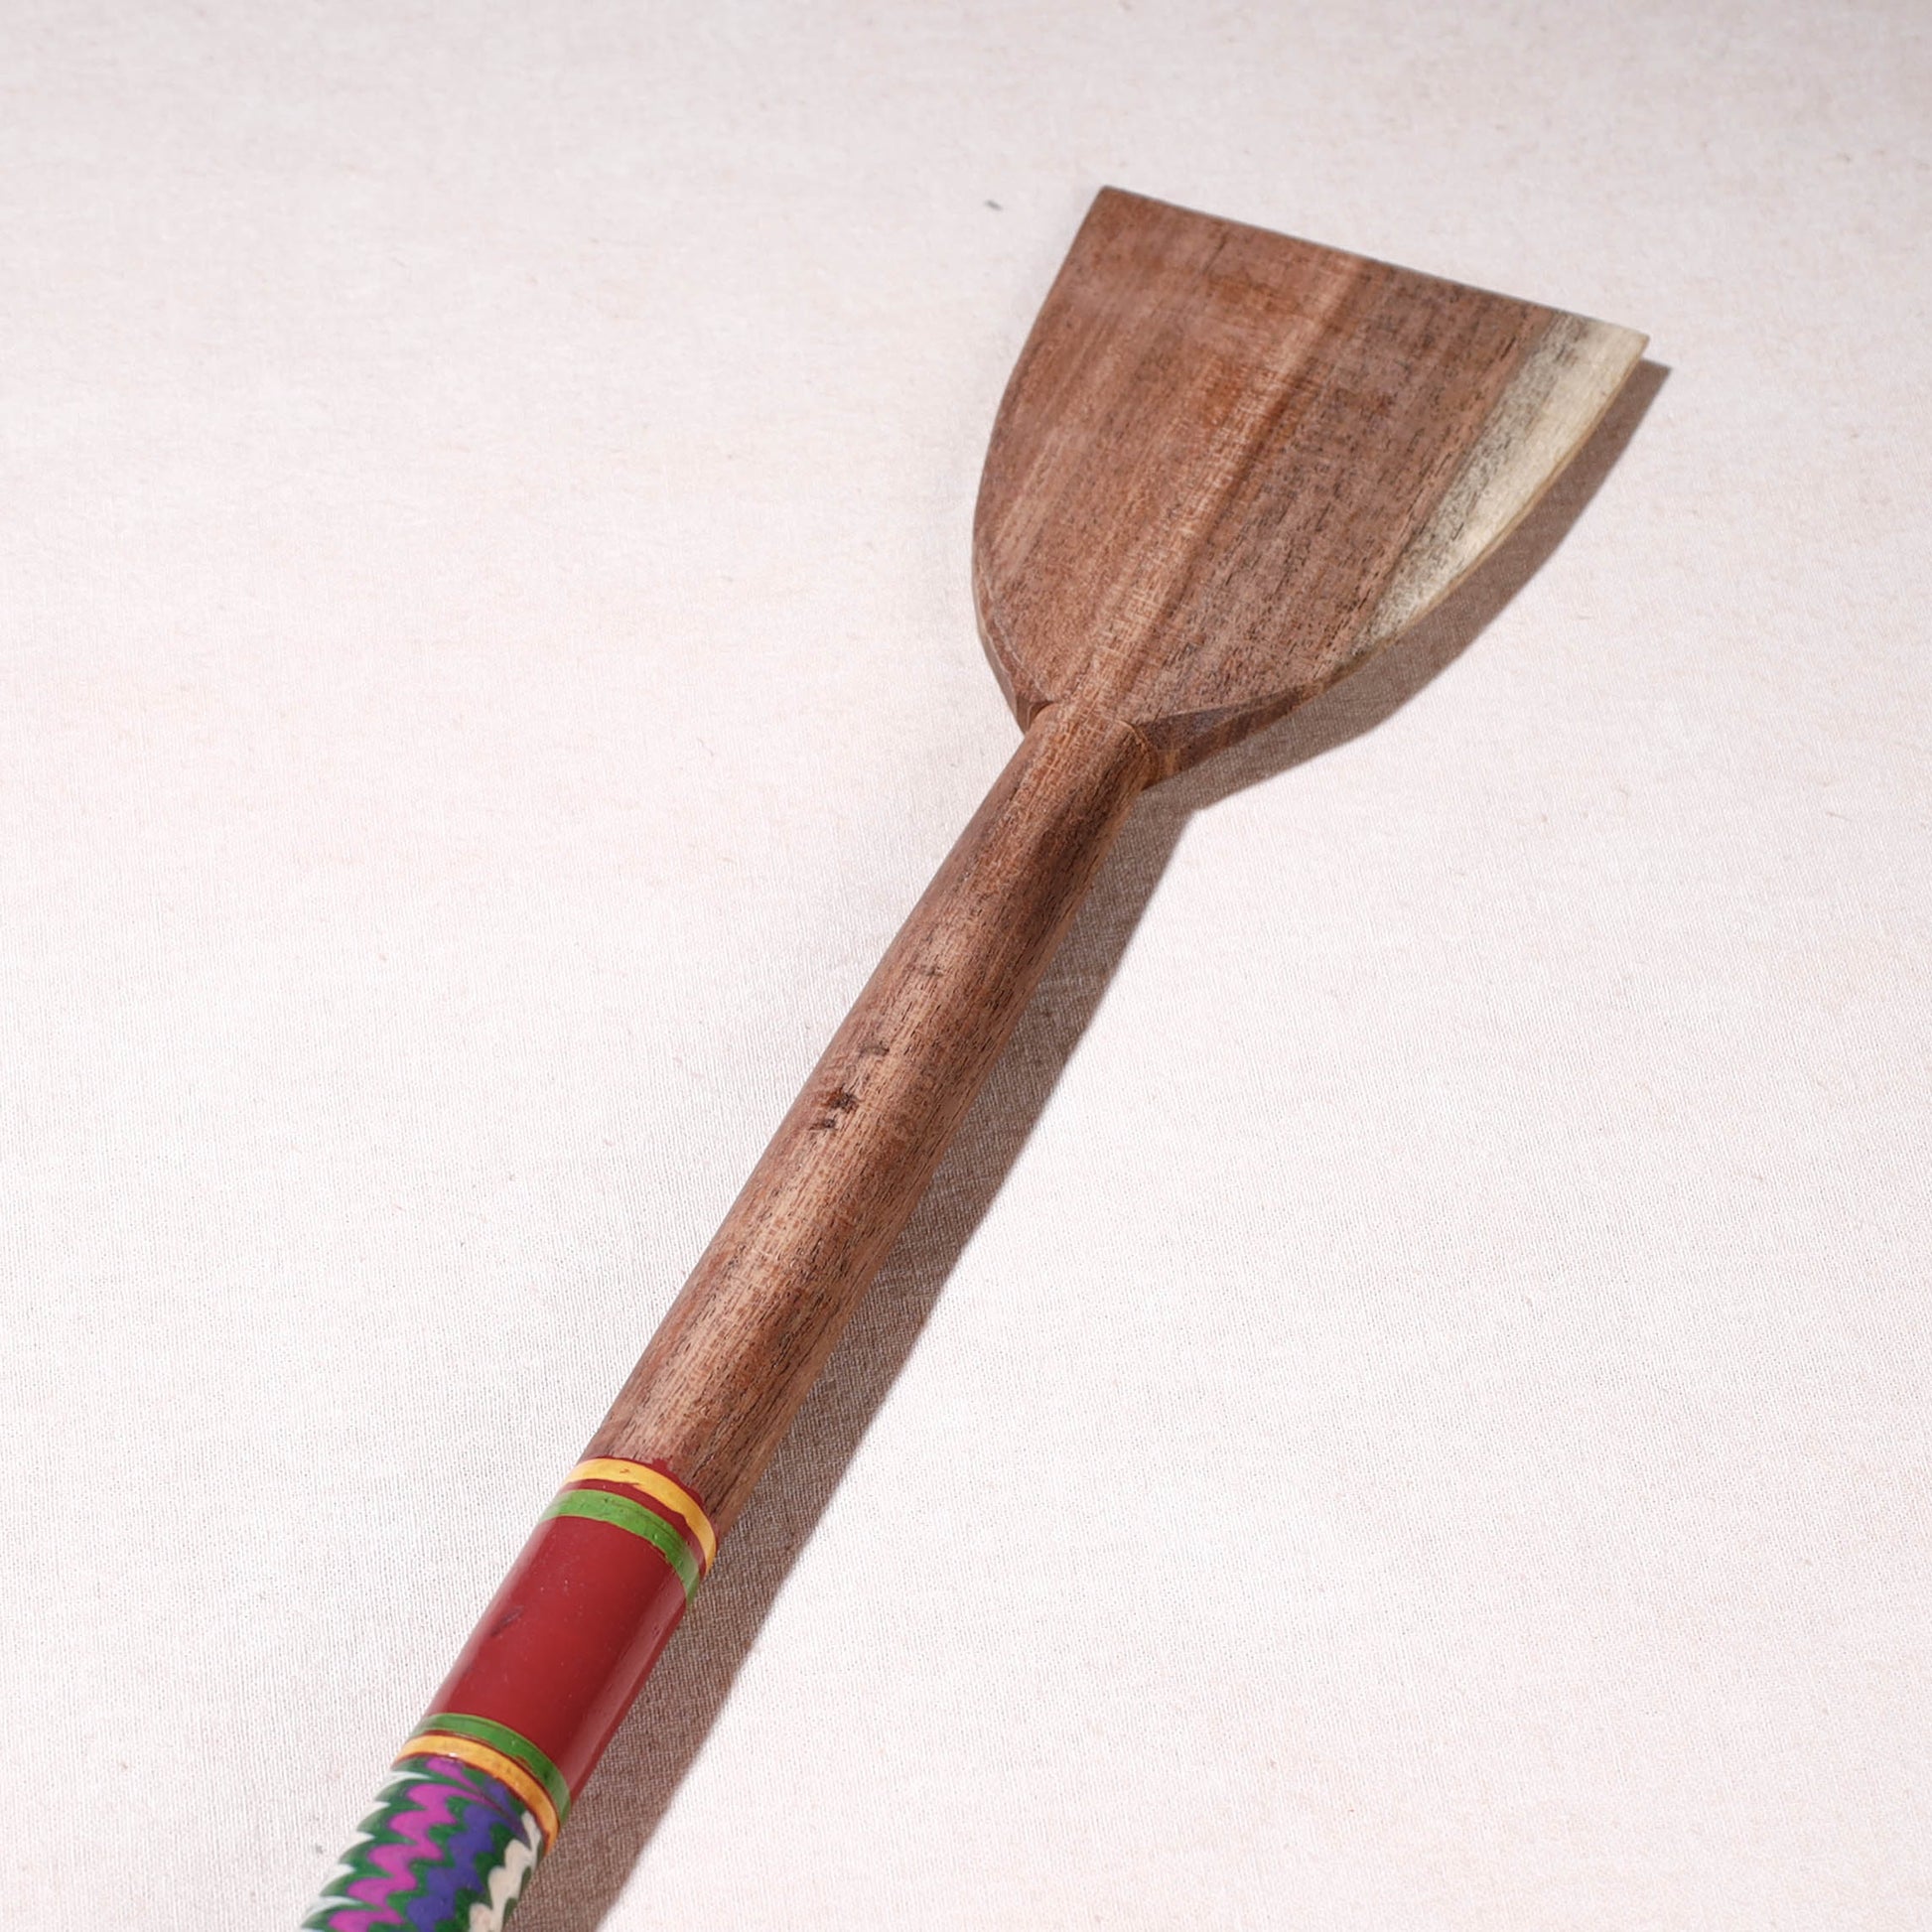 lacquered wooden spatula